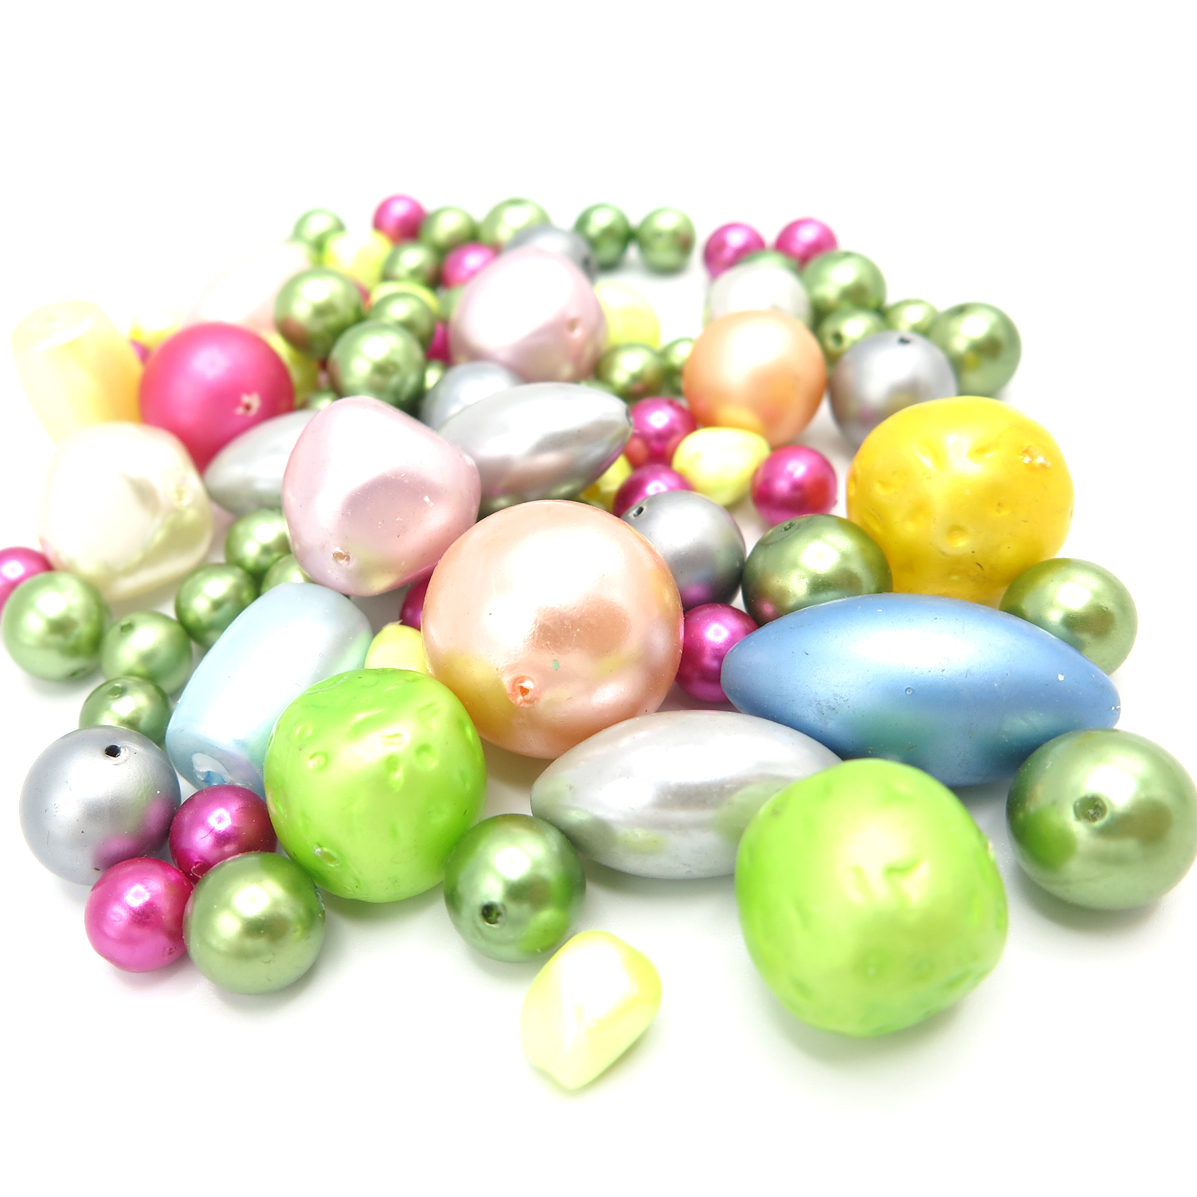 Vintage Plastic Colorful Assortment of Donut Beads